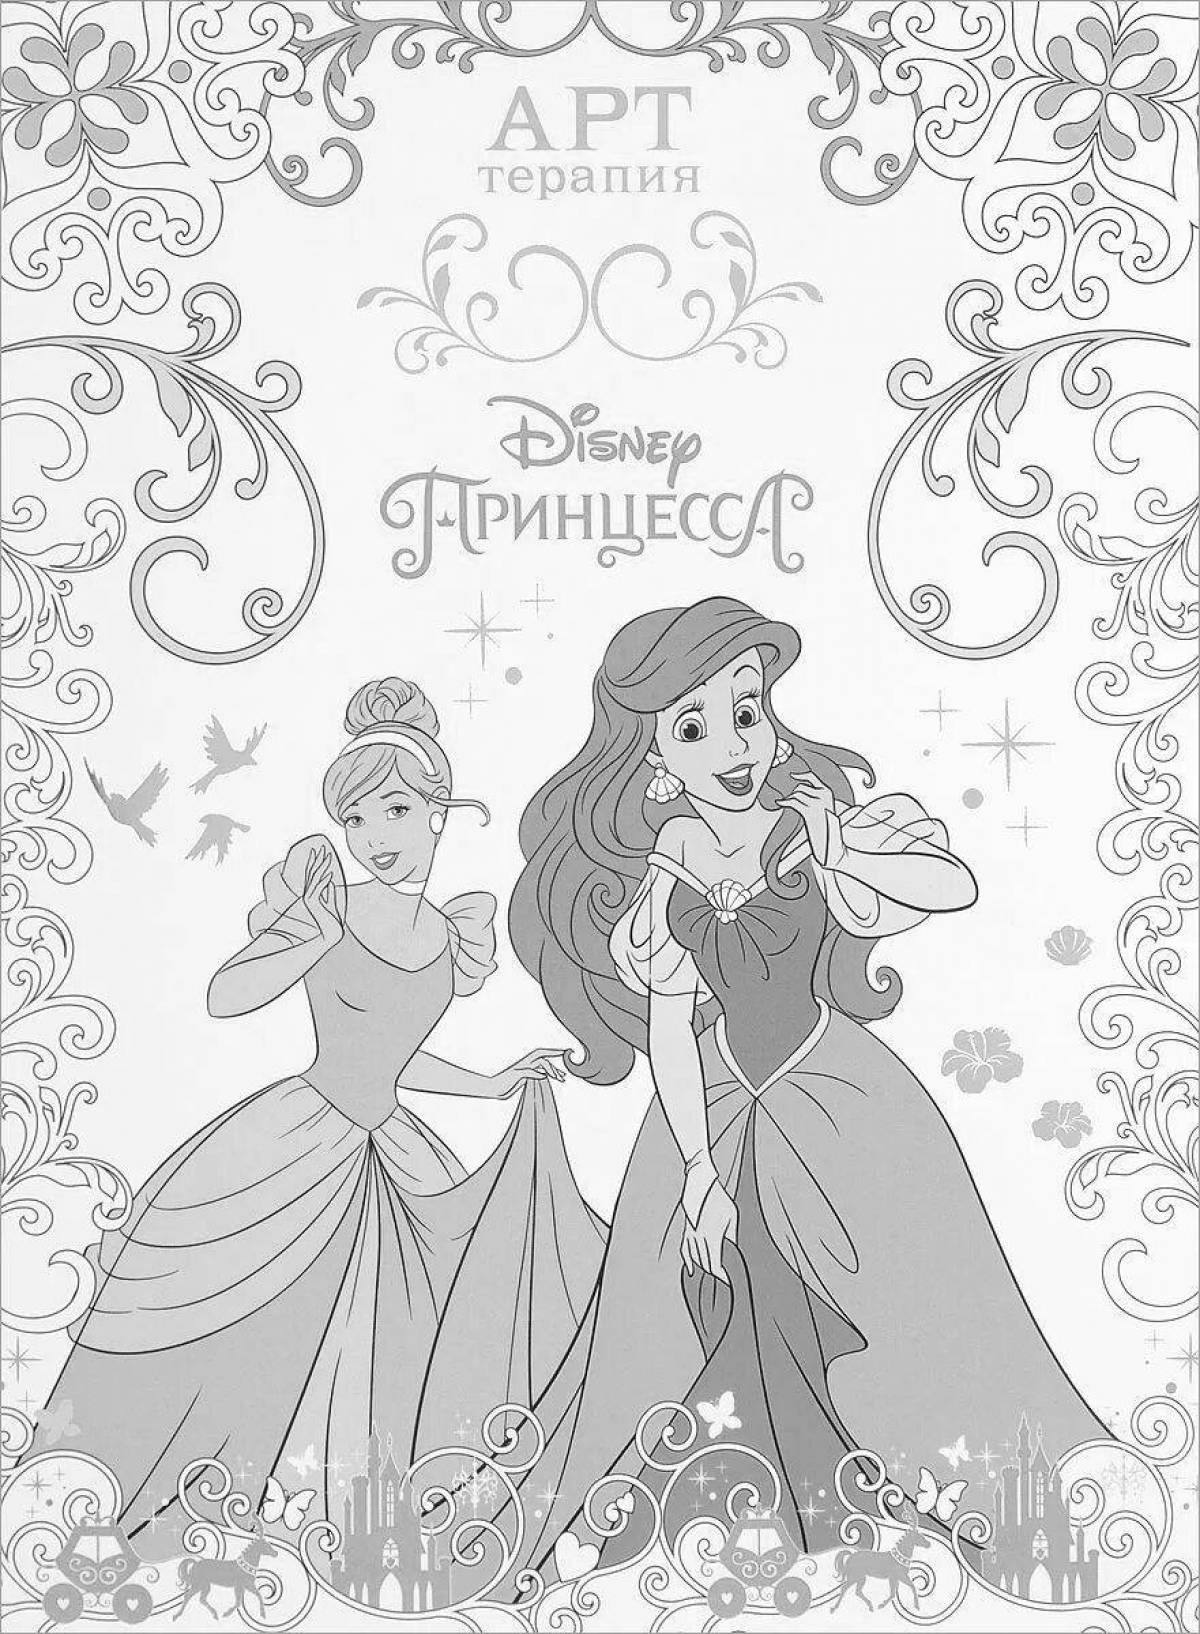 Awesome princess coloring book